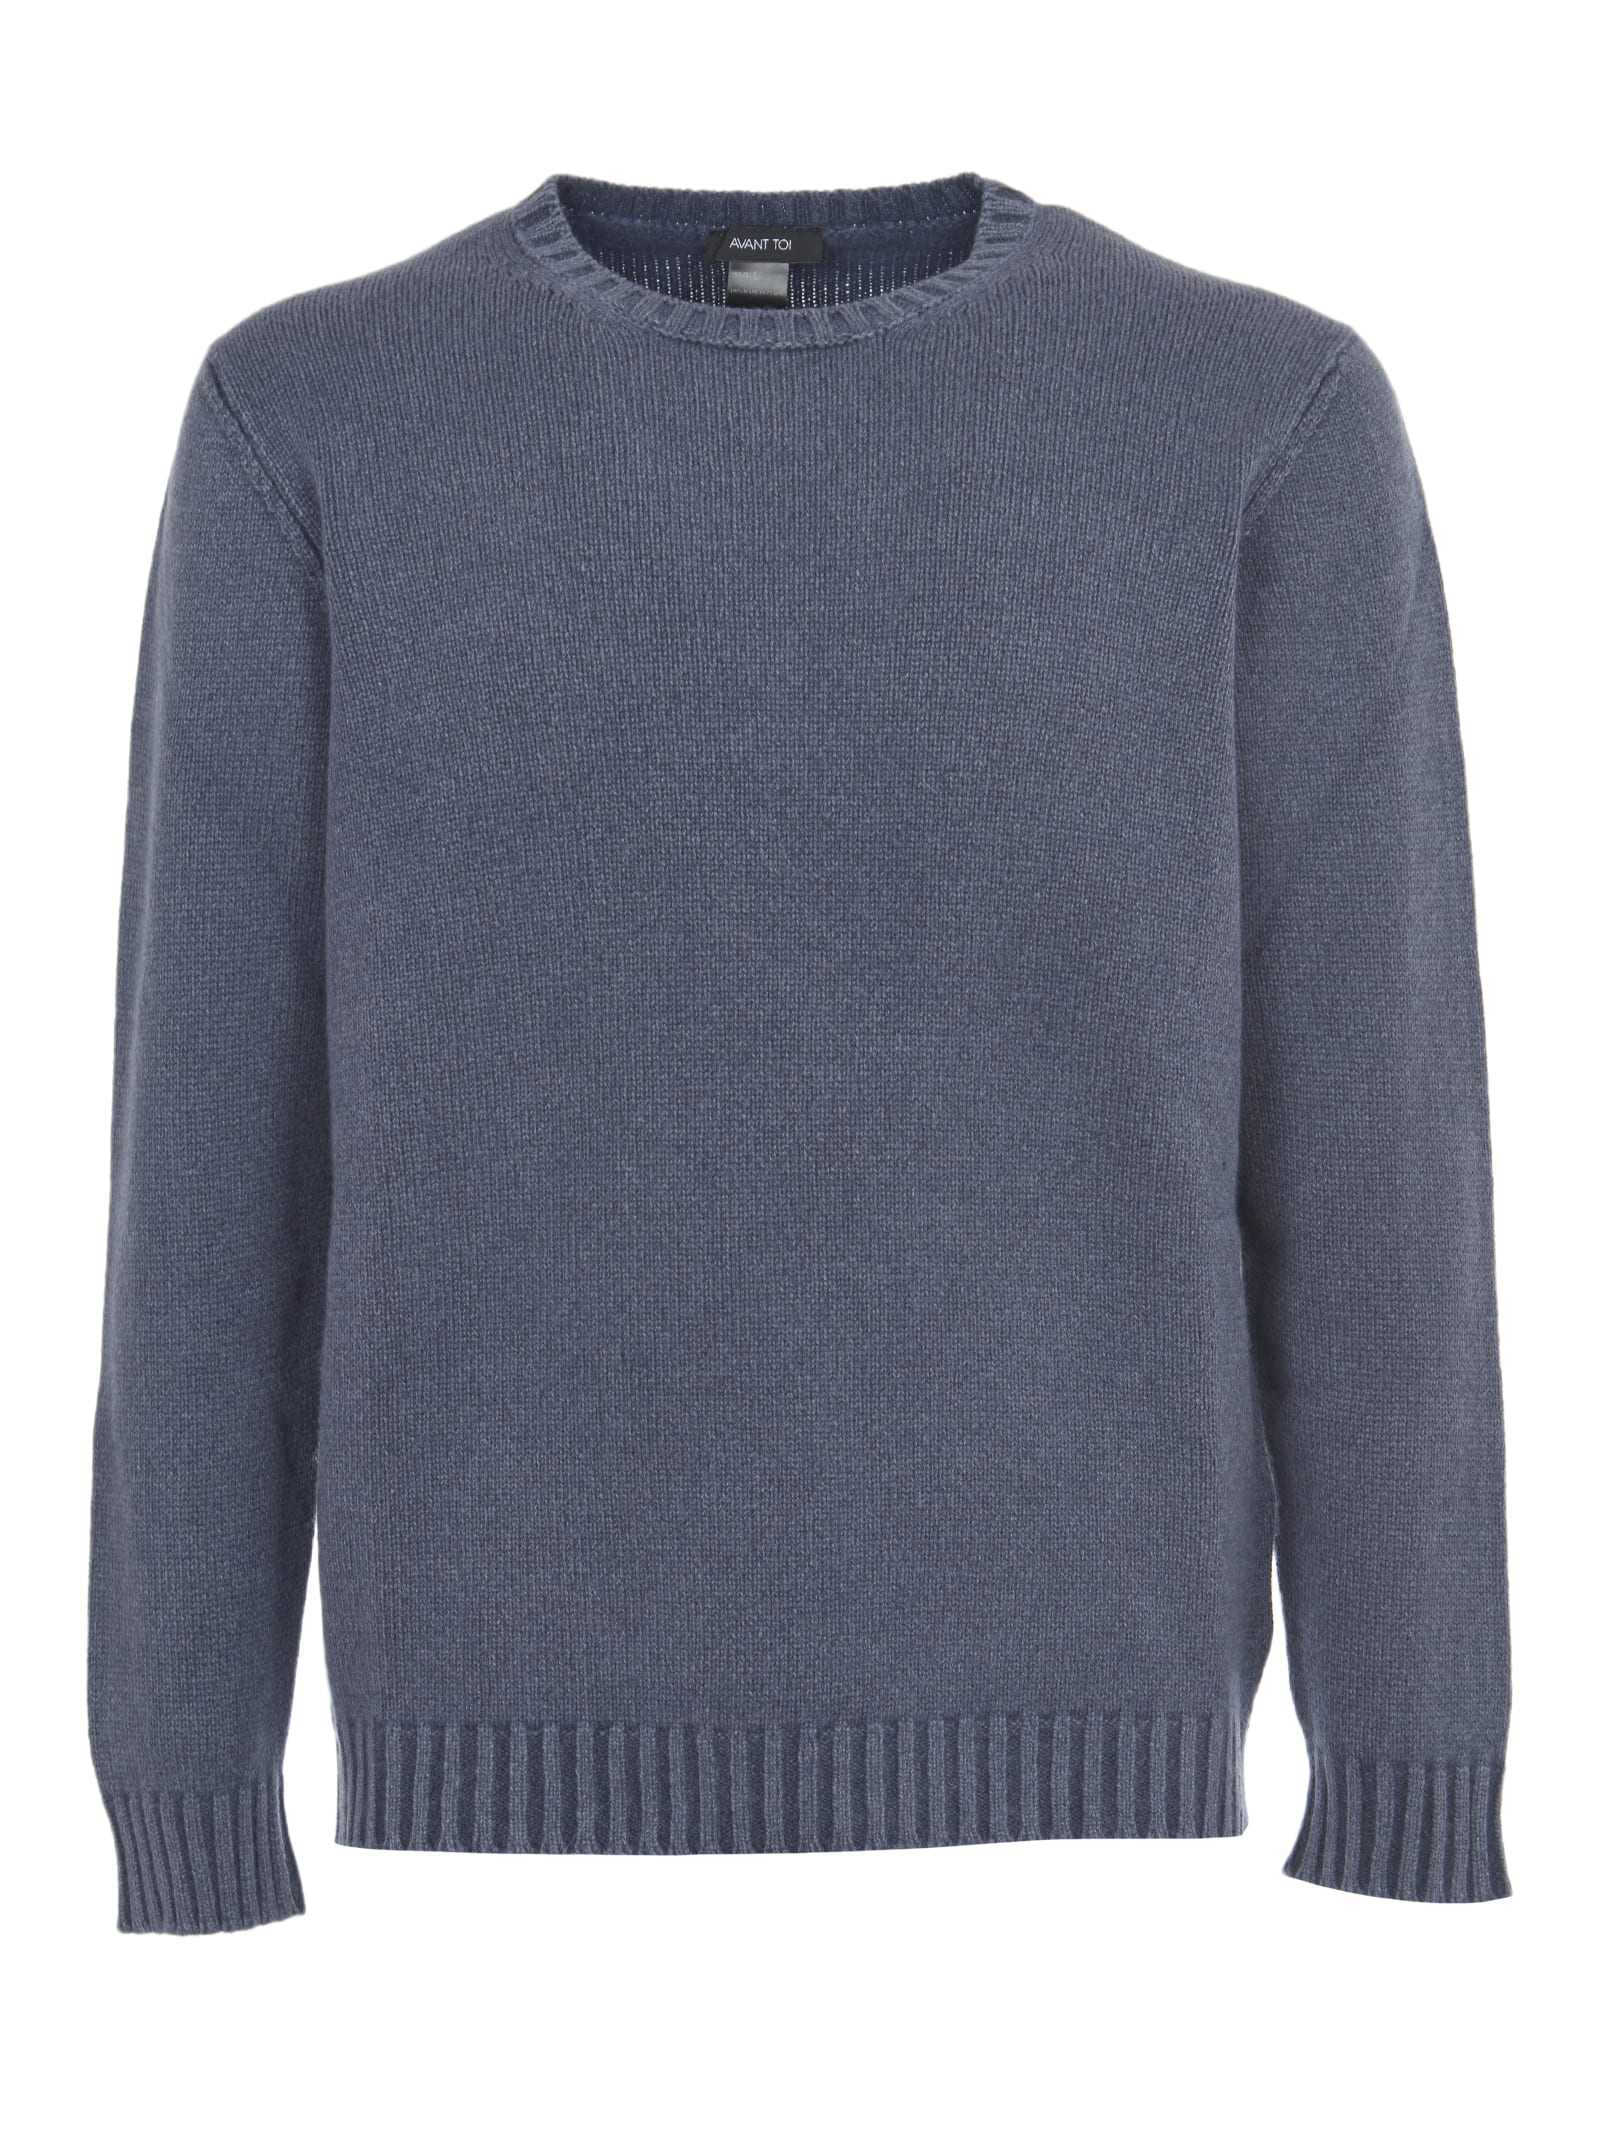 Avant Toi Blue Cashmere And Wool Sweater